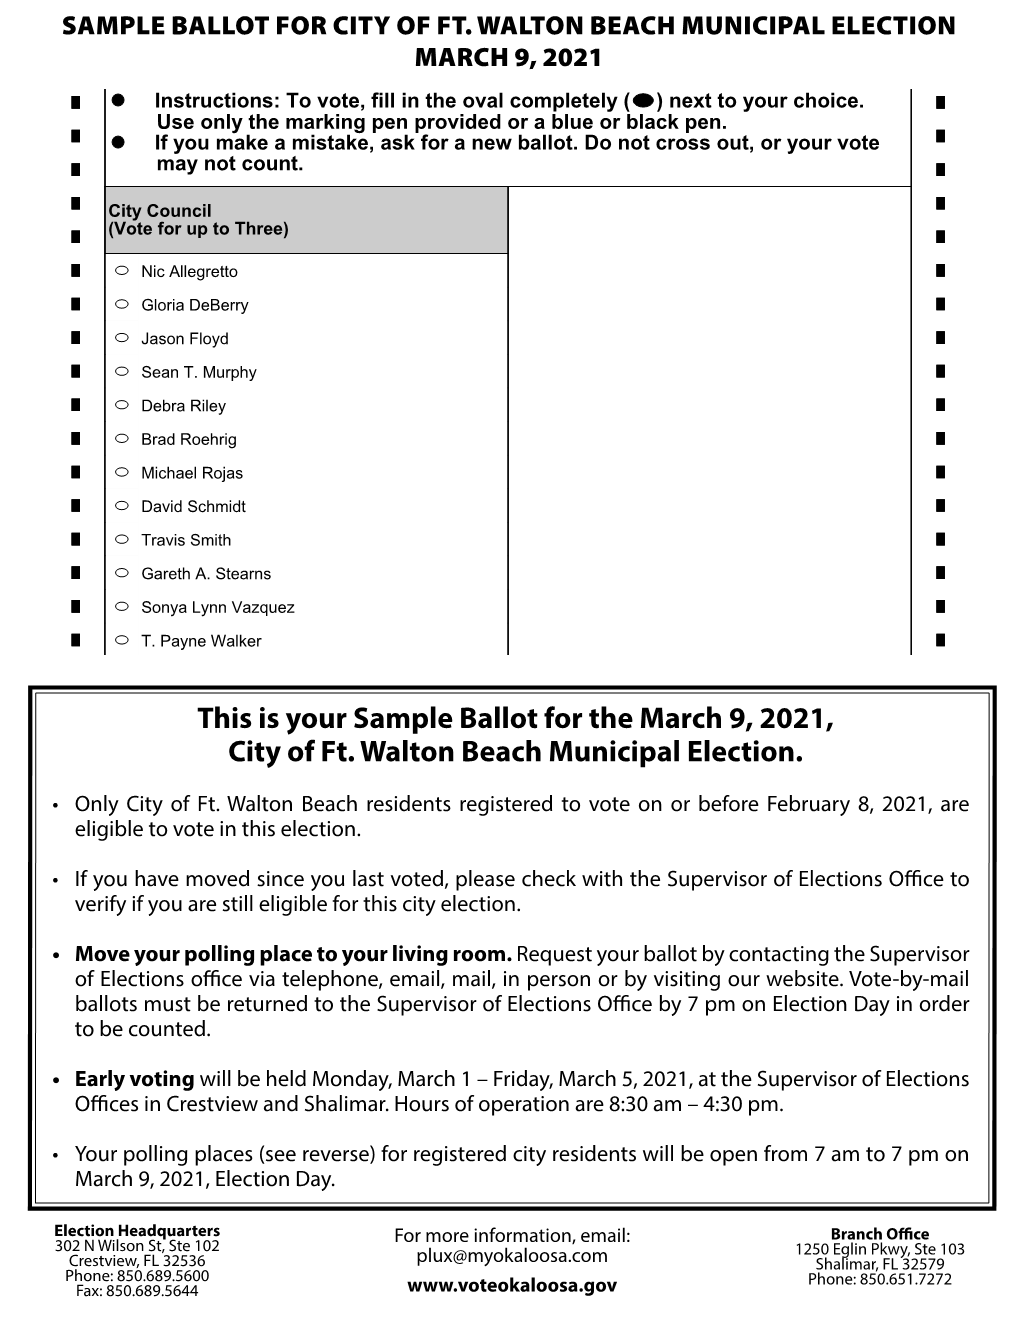 This Is Your Sample Ballot for the March 9, 2021, City of Ft. Walton Beach Municipal Election